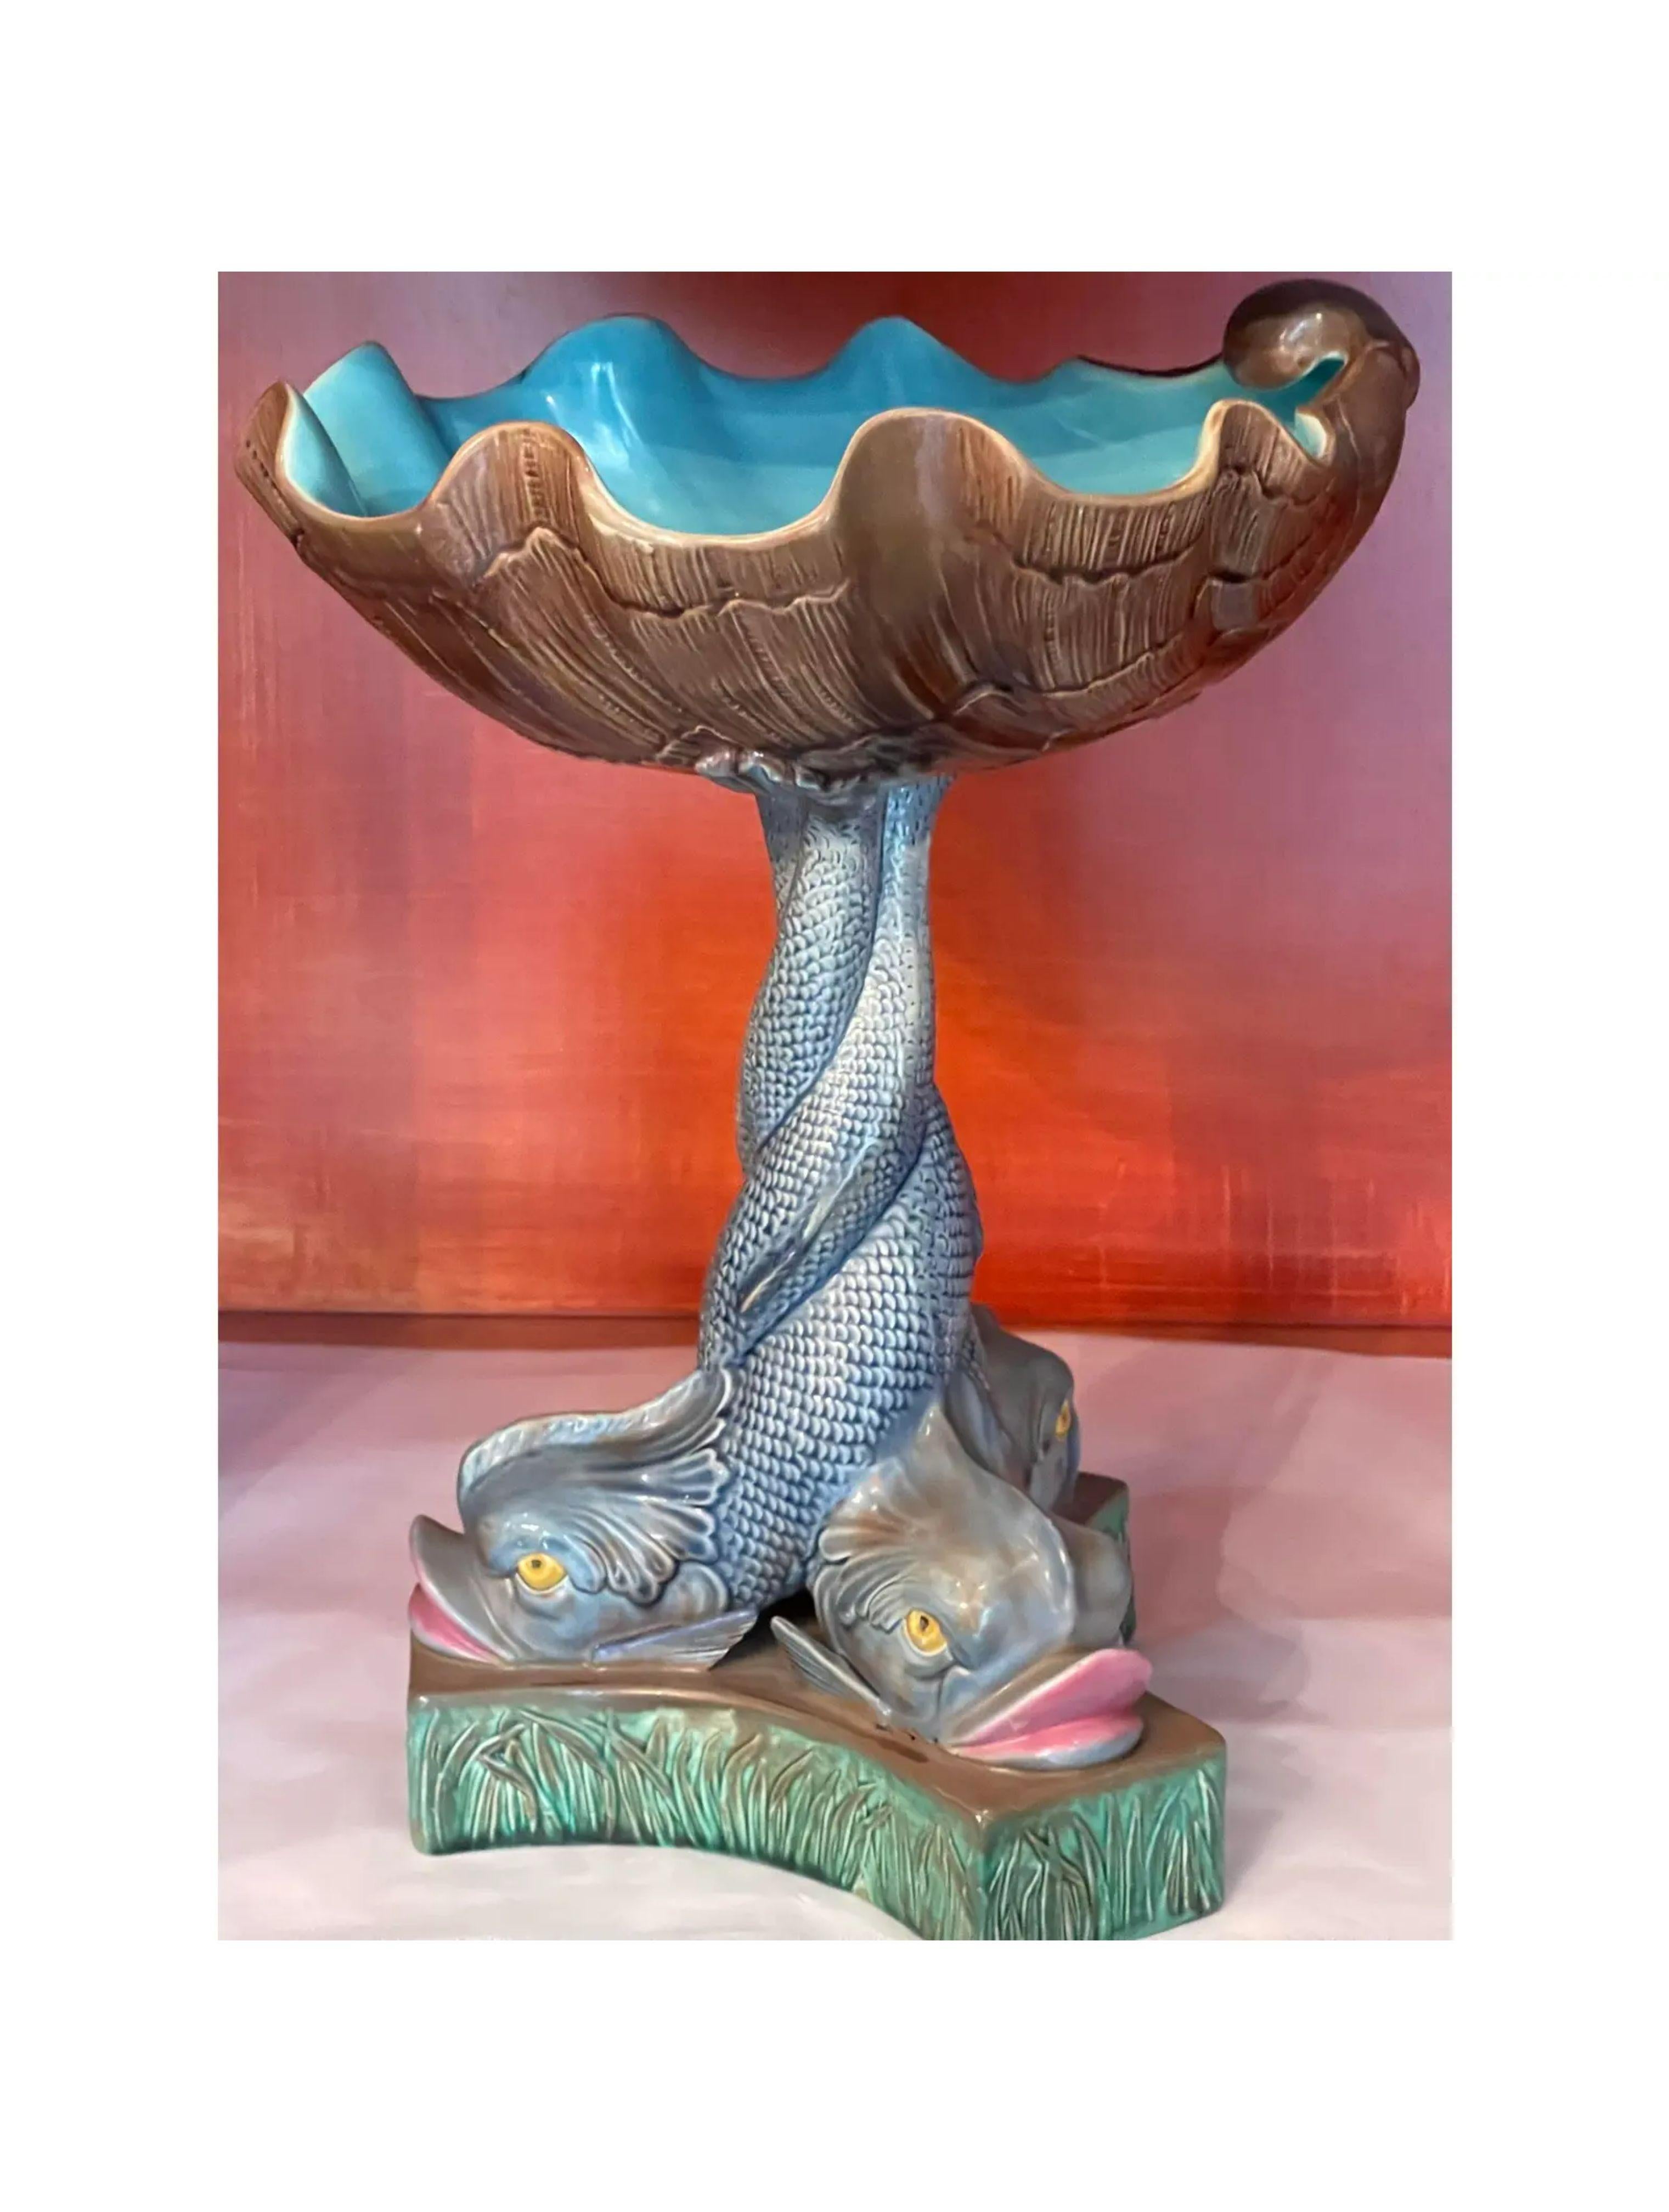 Rare antique triple Dolphin Majolica pottery centerpiece bowl. A rare example dating to the 19th century with three dolphins around the base and a shell form bowl on top.

Additional information:
Materials: Pottery
Color: Blue
Period: 19th